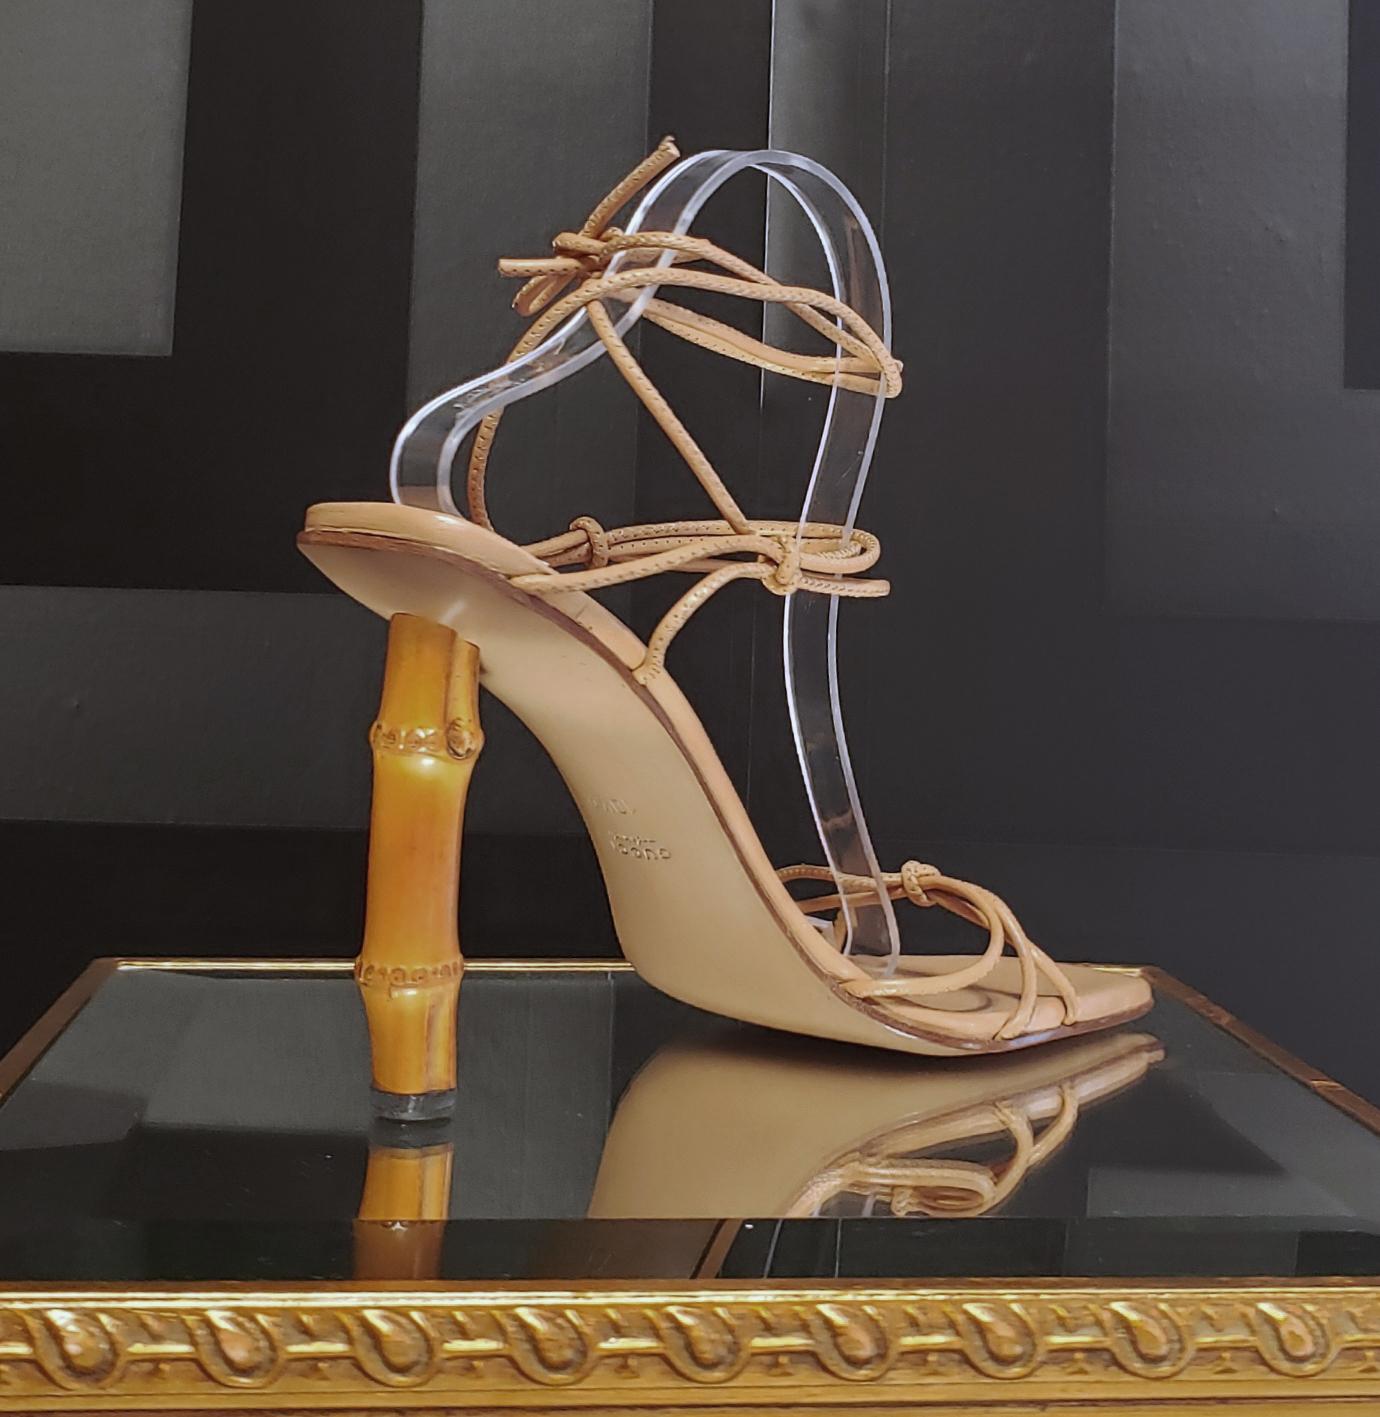 Brown S/S 2002 TOM FORD for GUCCI NUDE BAMBOO HEEL SHOES 10.5